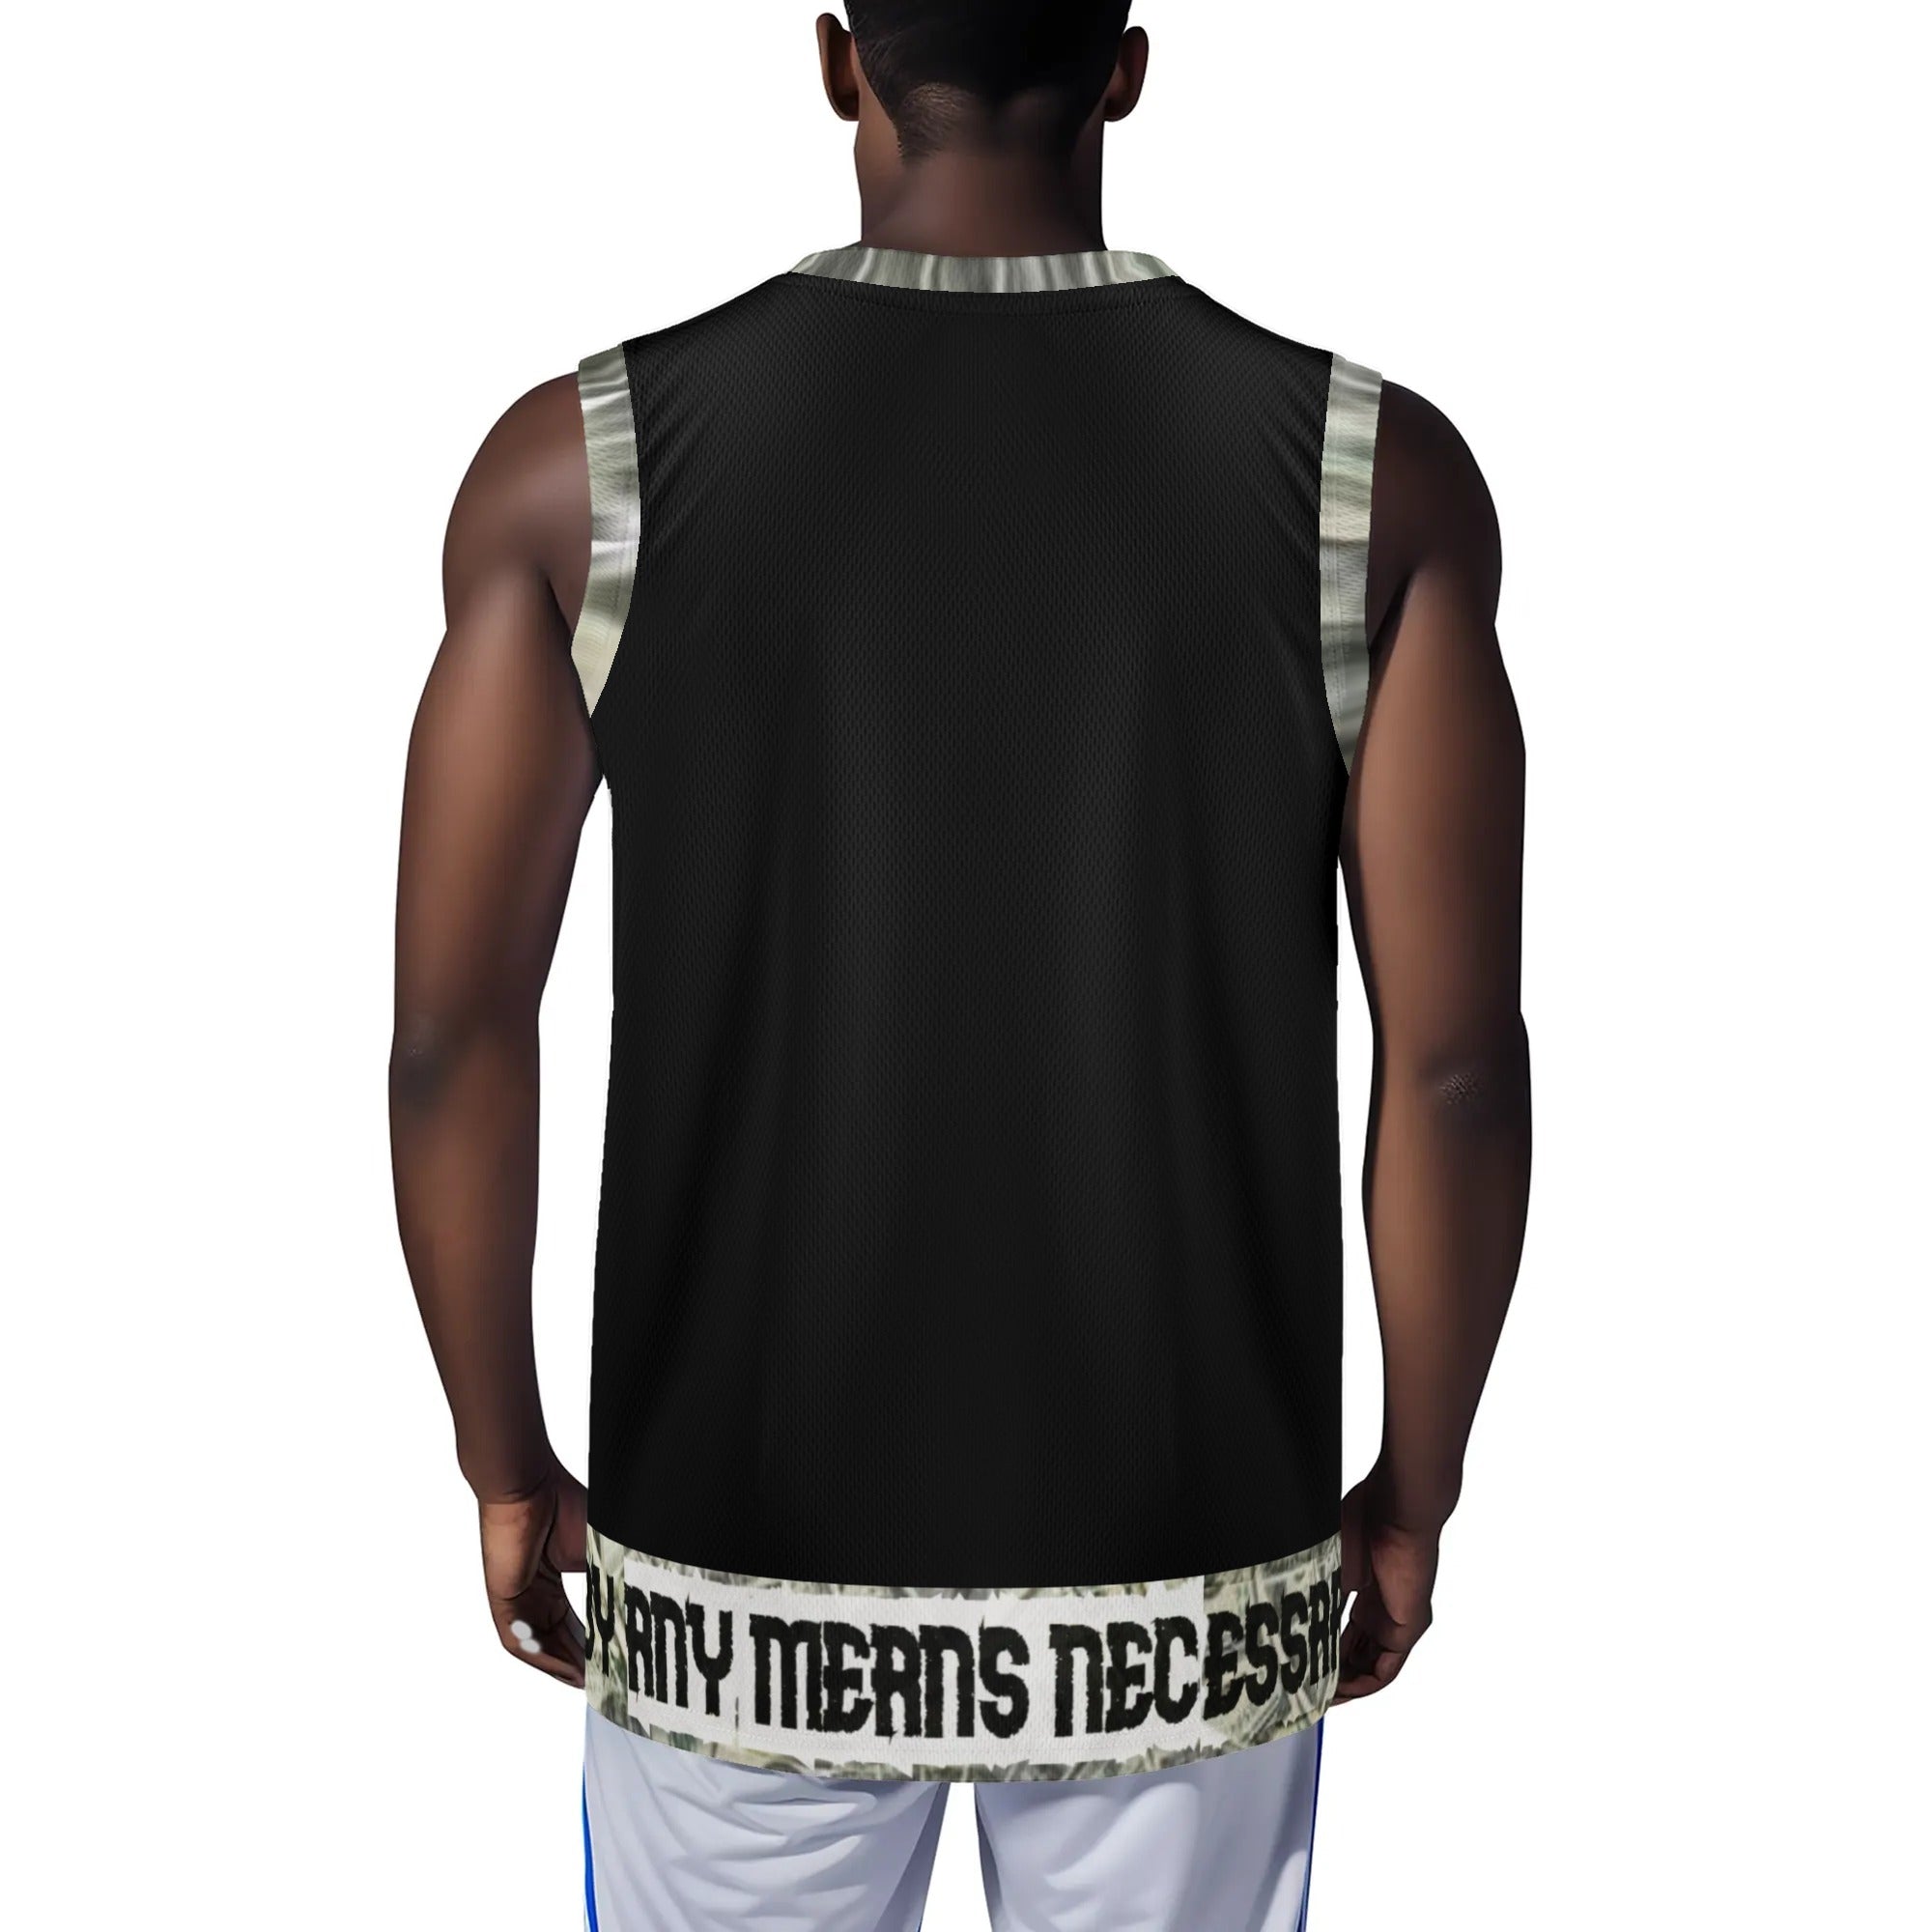 B.A.M.N- By Any Means Necessary X Men's Basketball Jerseys Tank Top Black